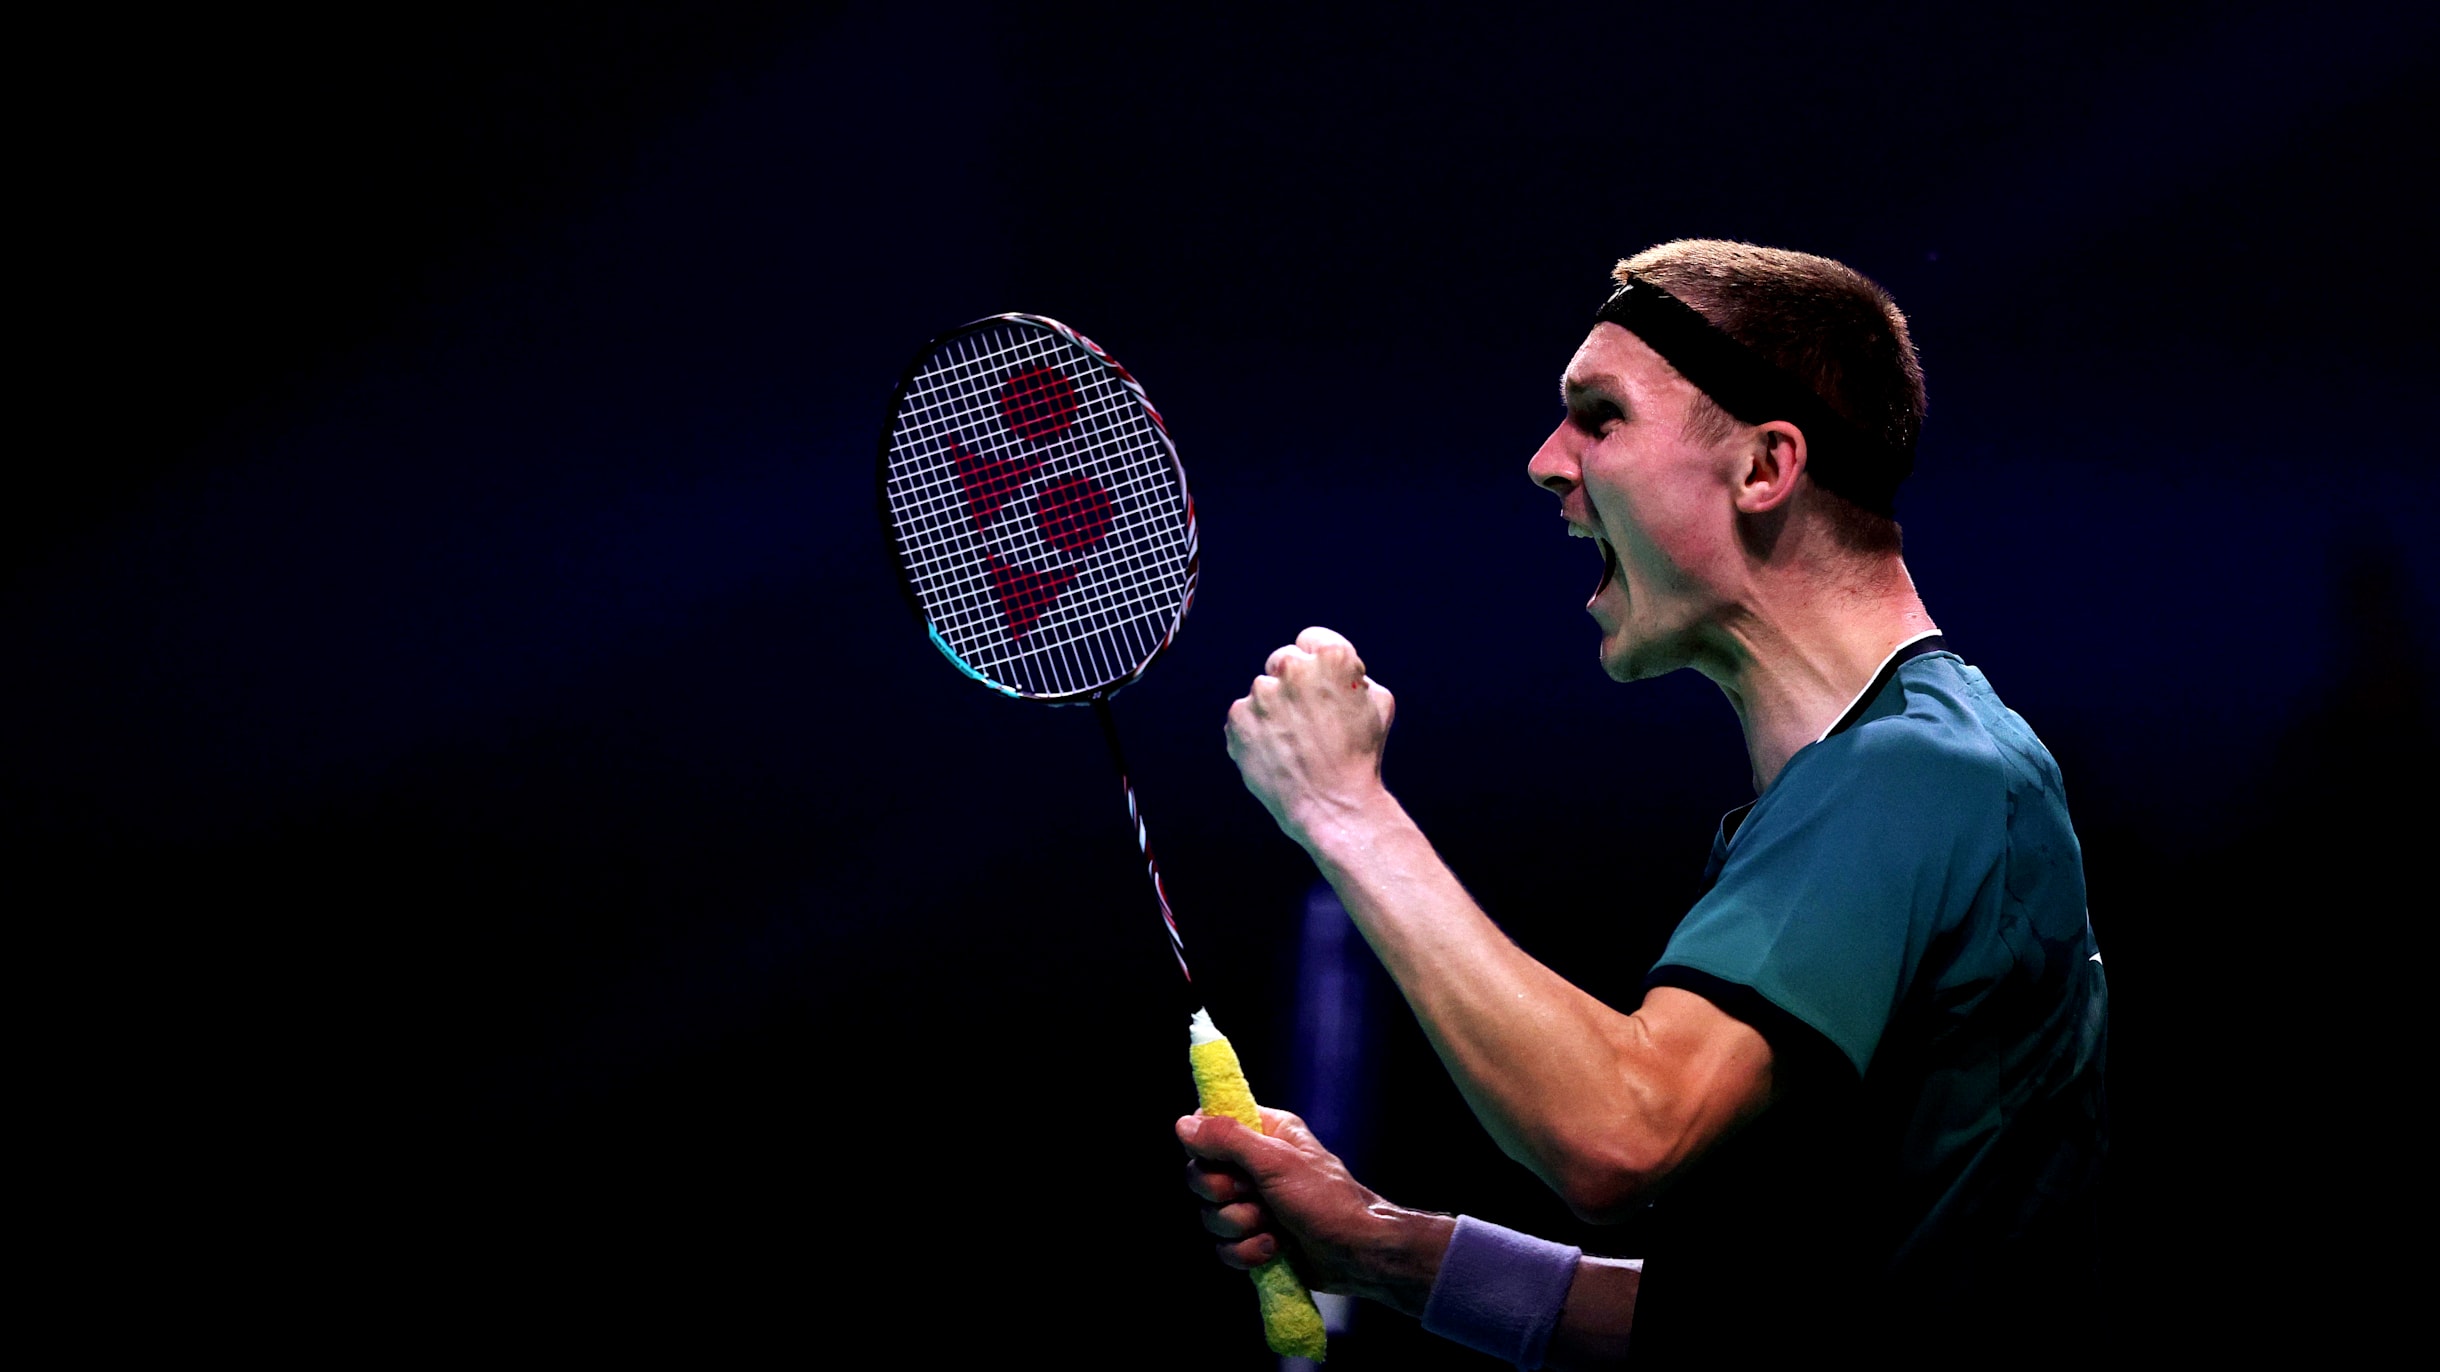 BWF Badminton World Championships 2023 preview Full schedule and how to watch live